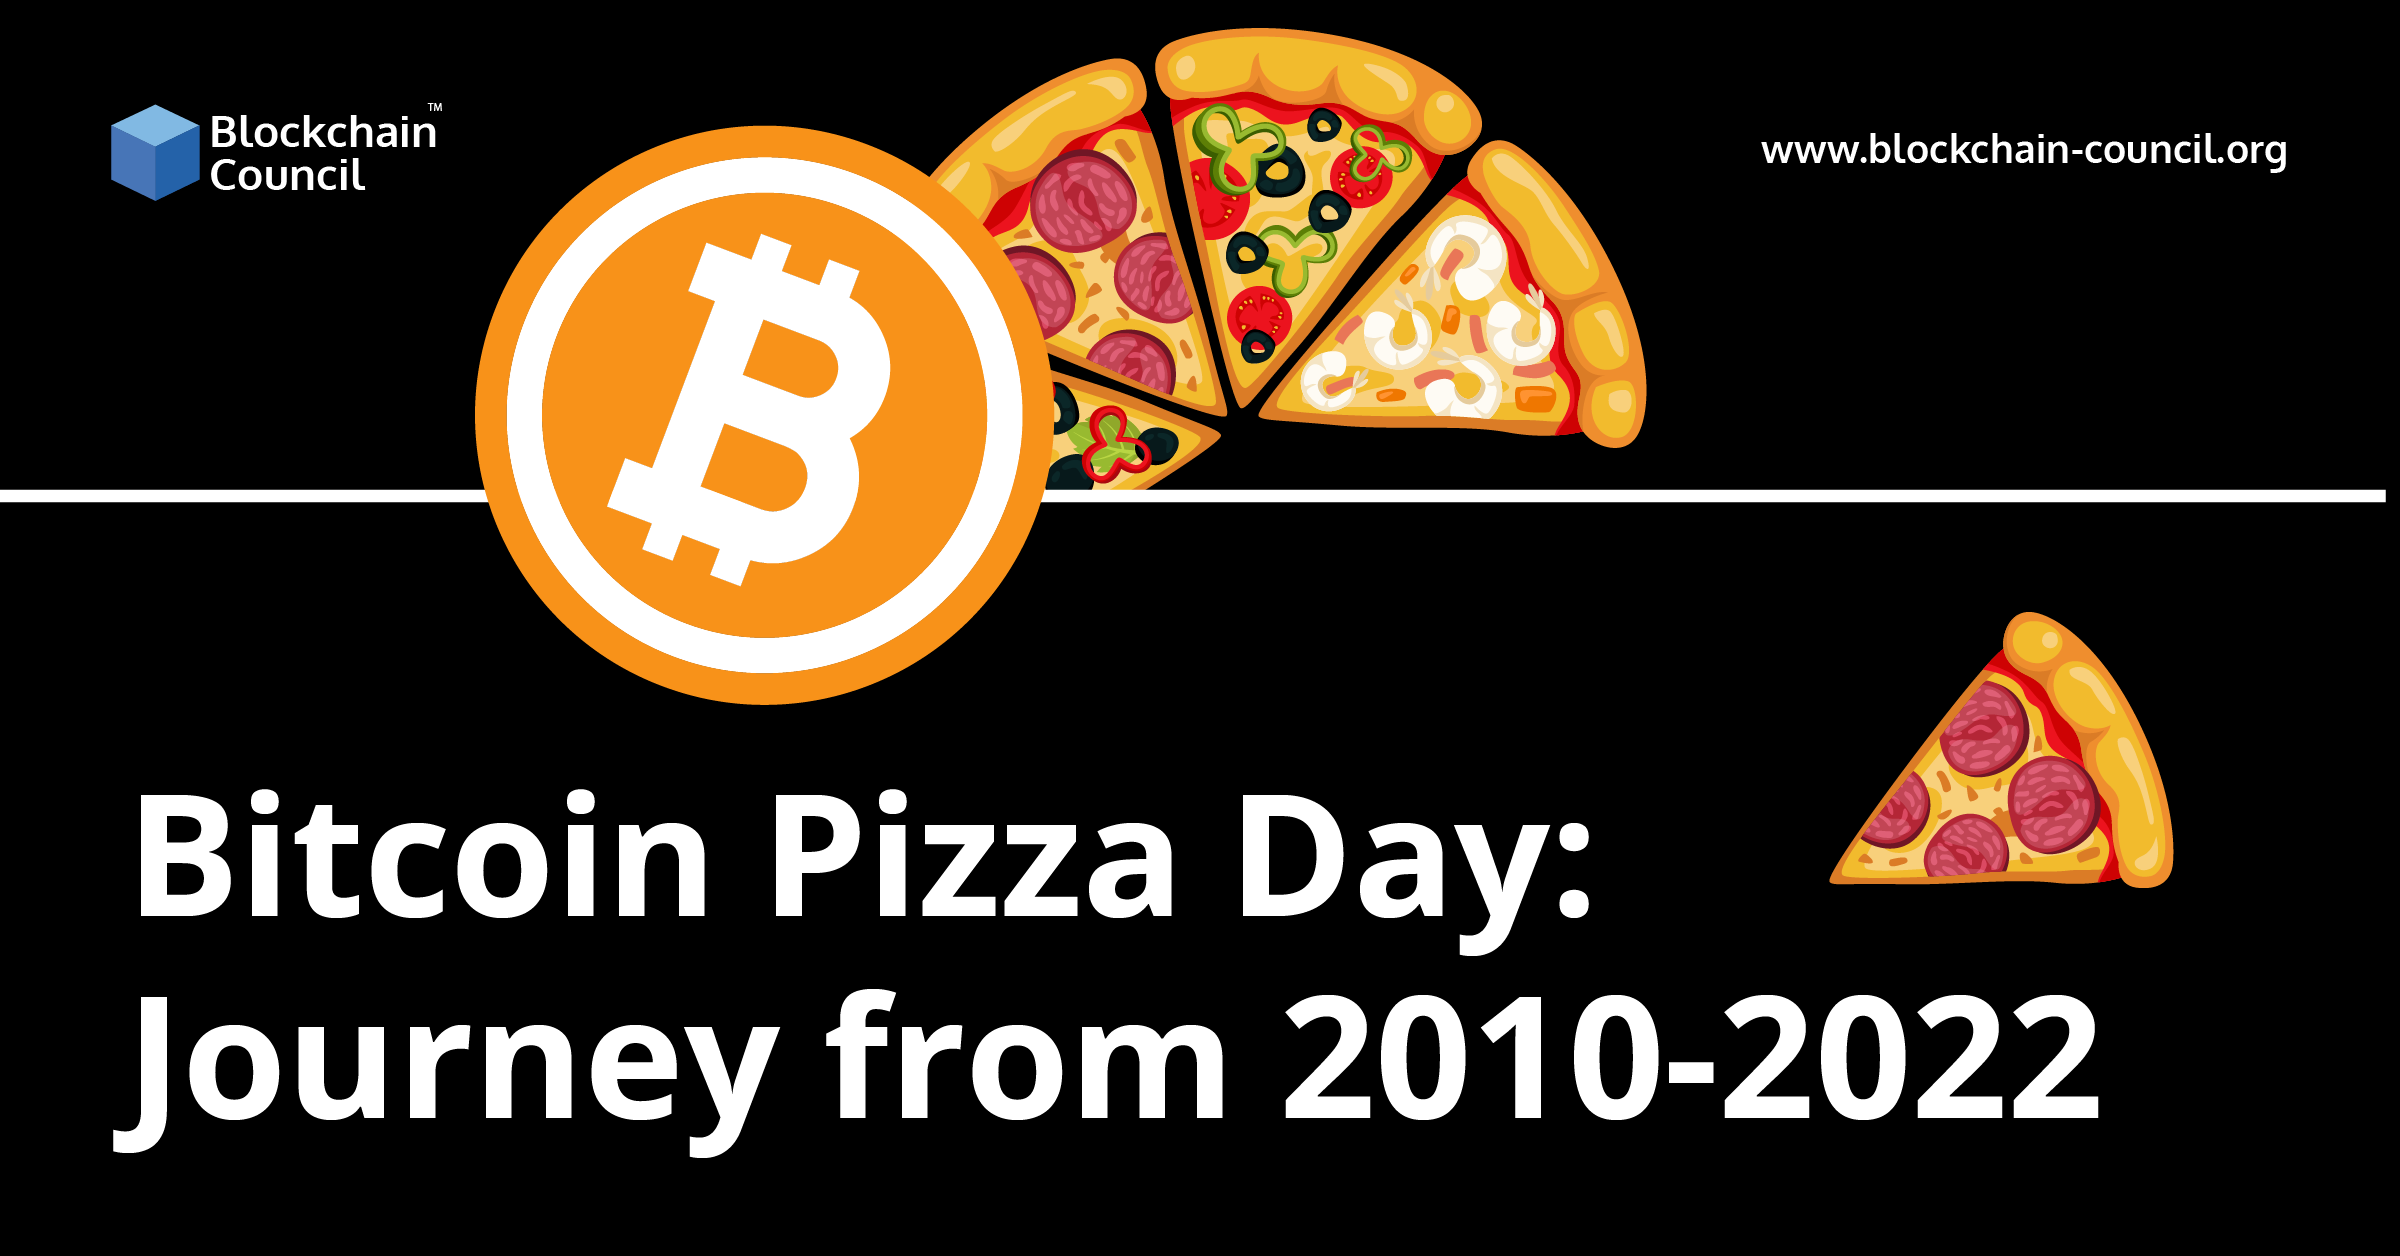 Bitcoin Pizza Day: Journey from 2010-2022